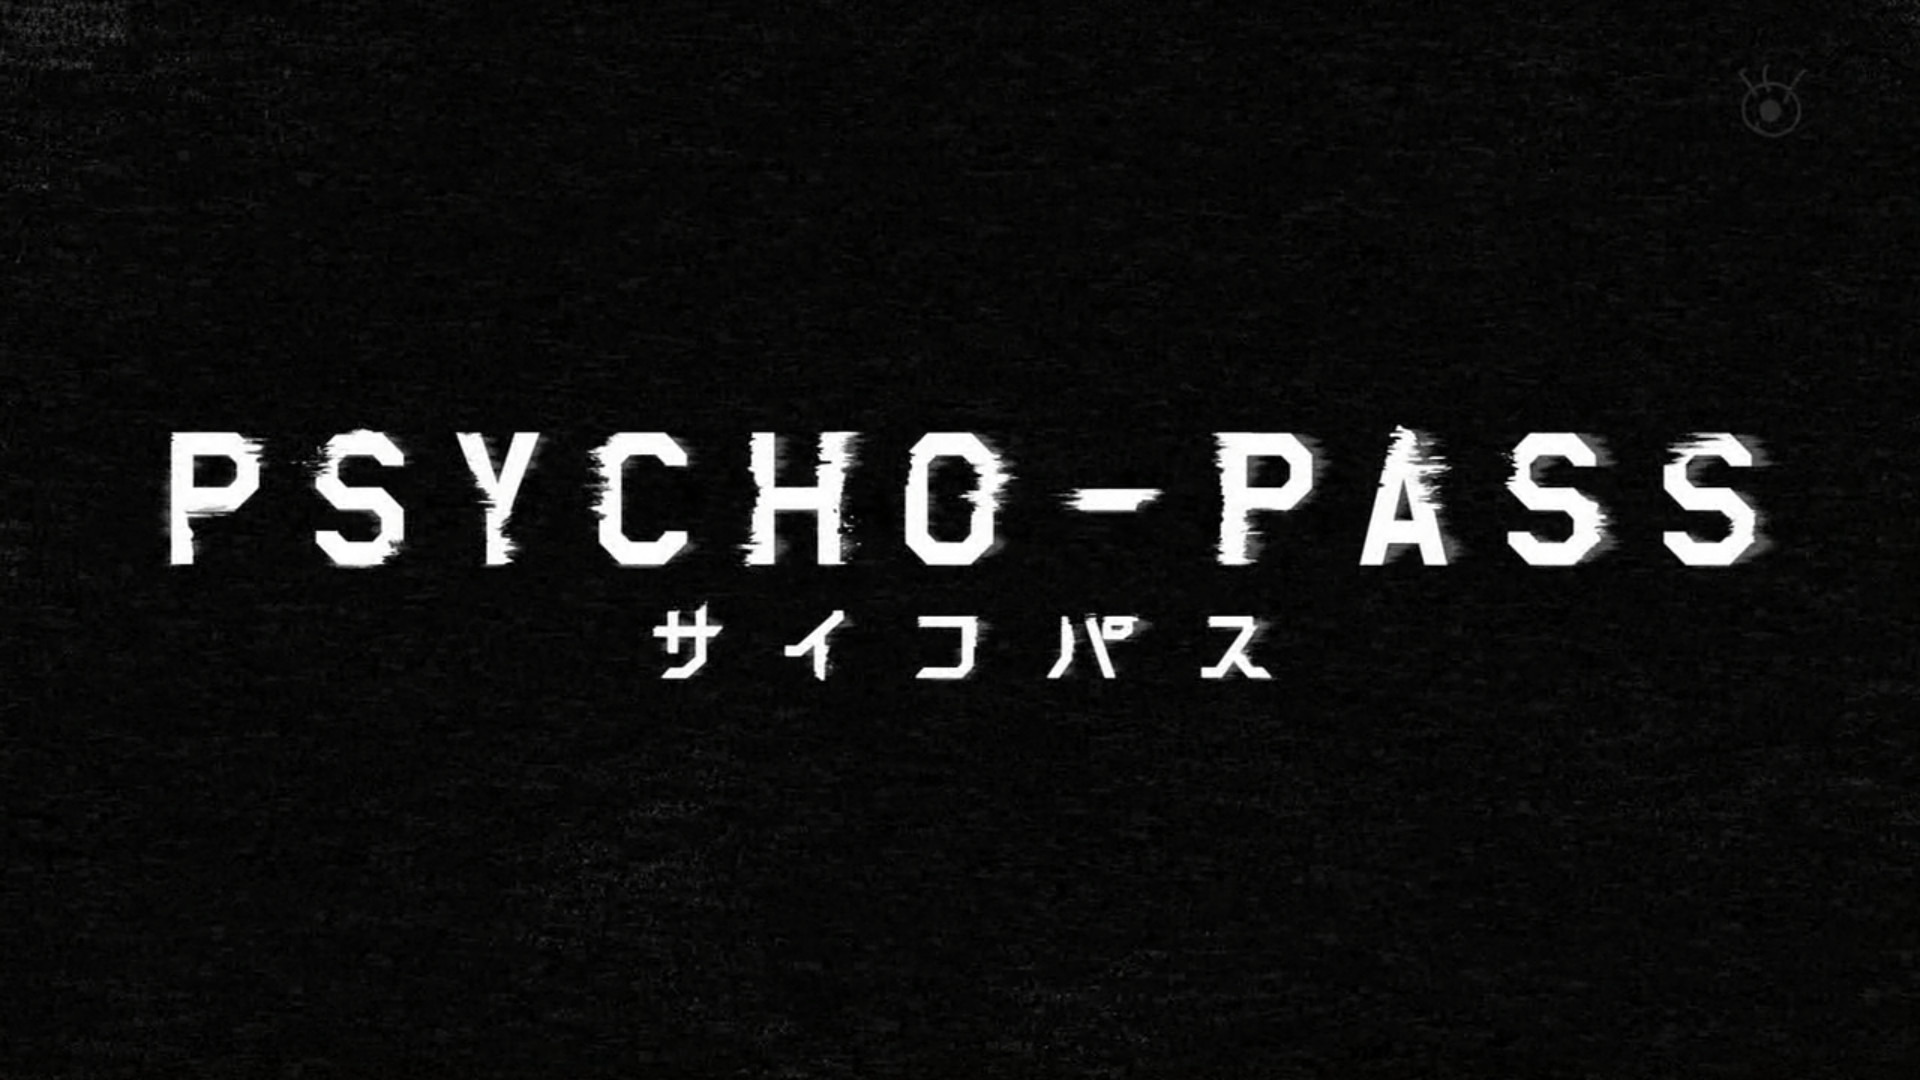 Psycho Realm Wallpapers